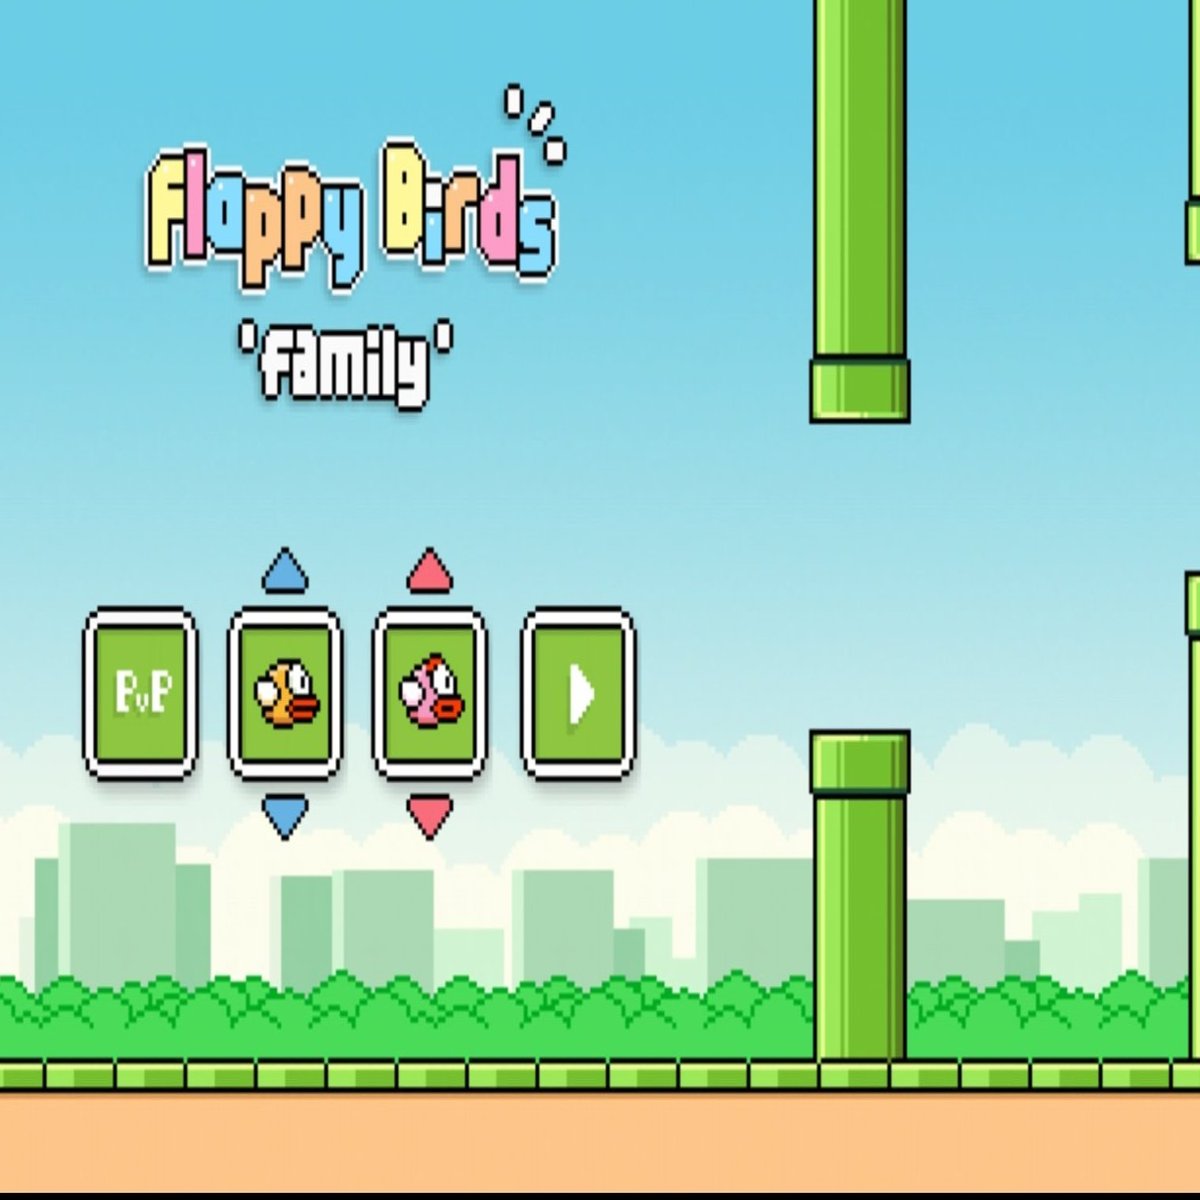 Flappy Bird is being pulled down by owner in under 7 hours (update